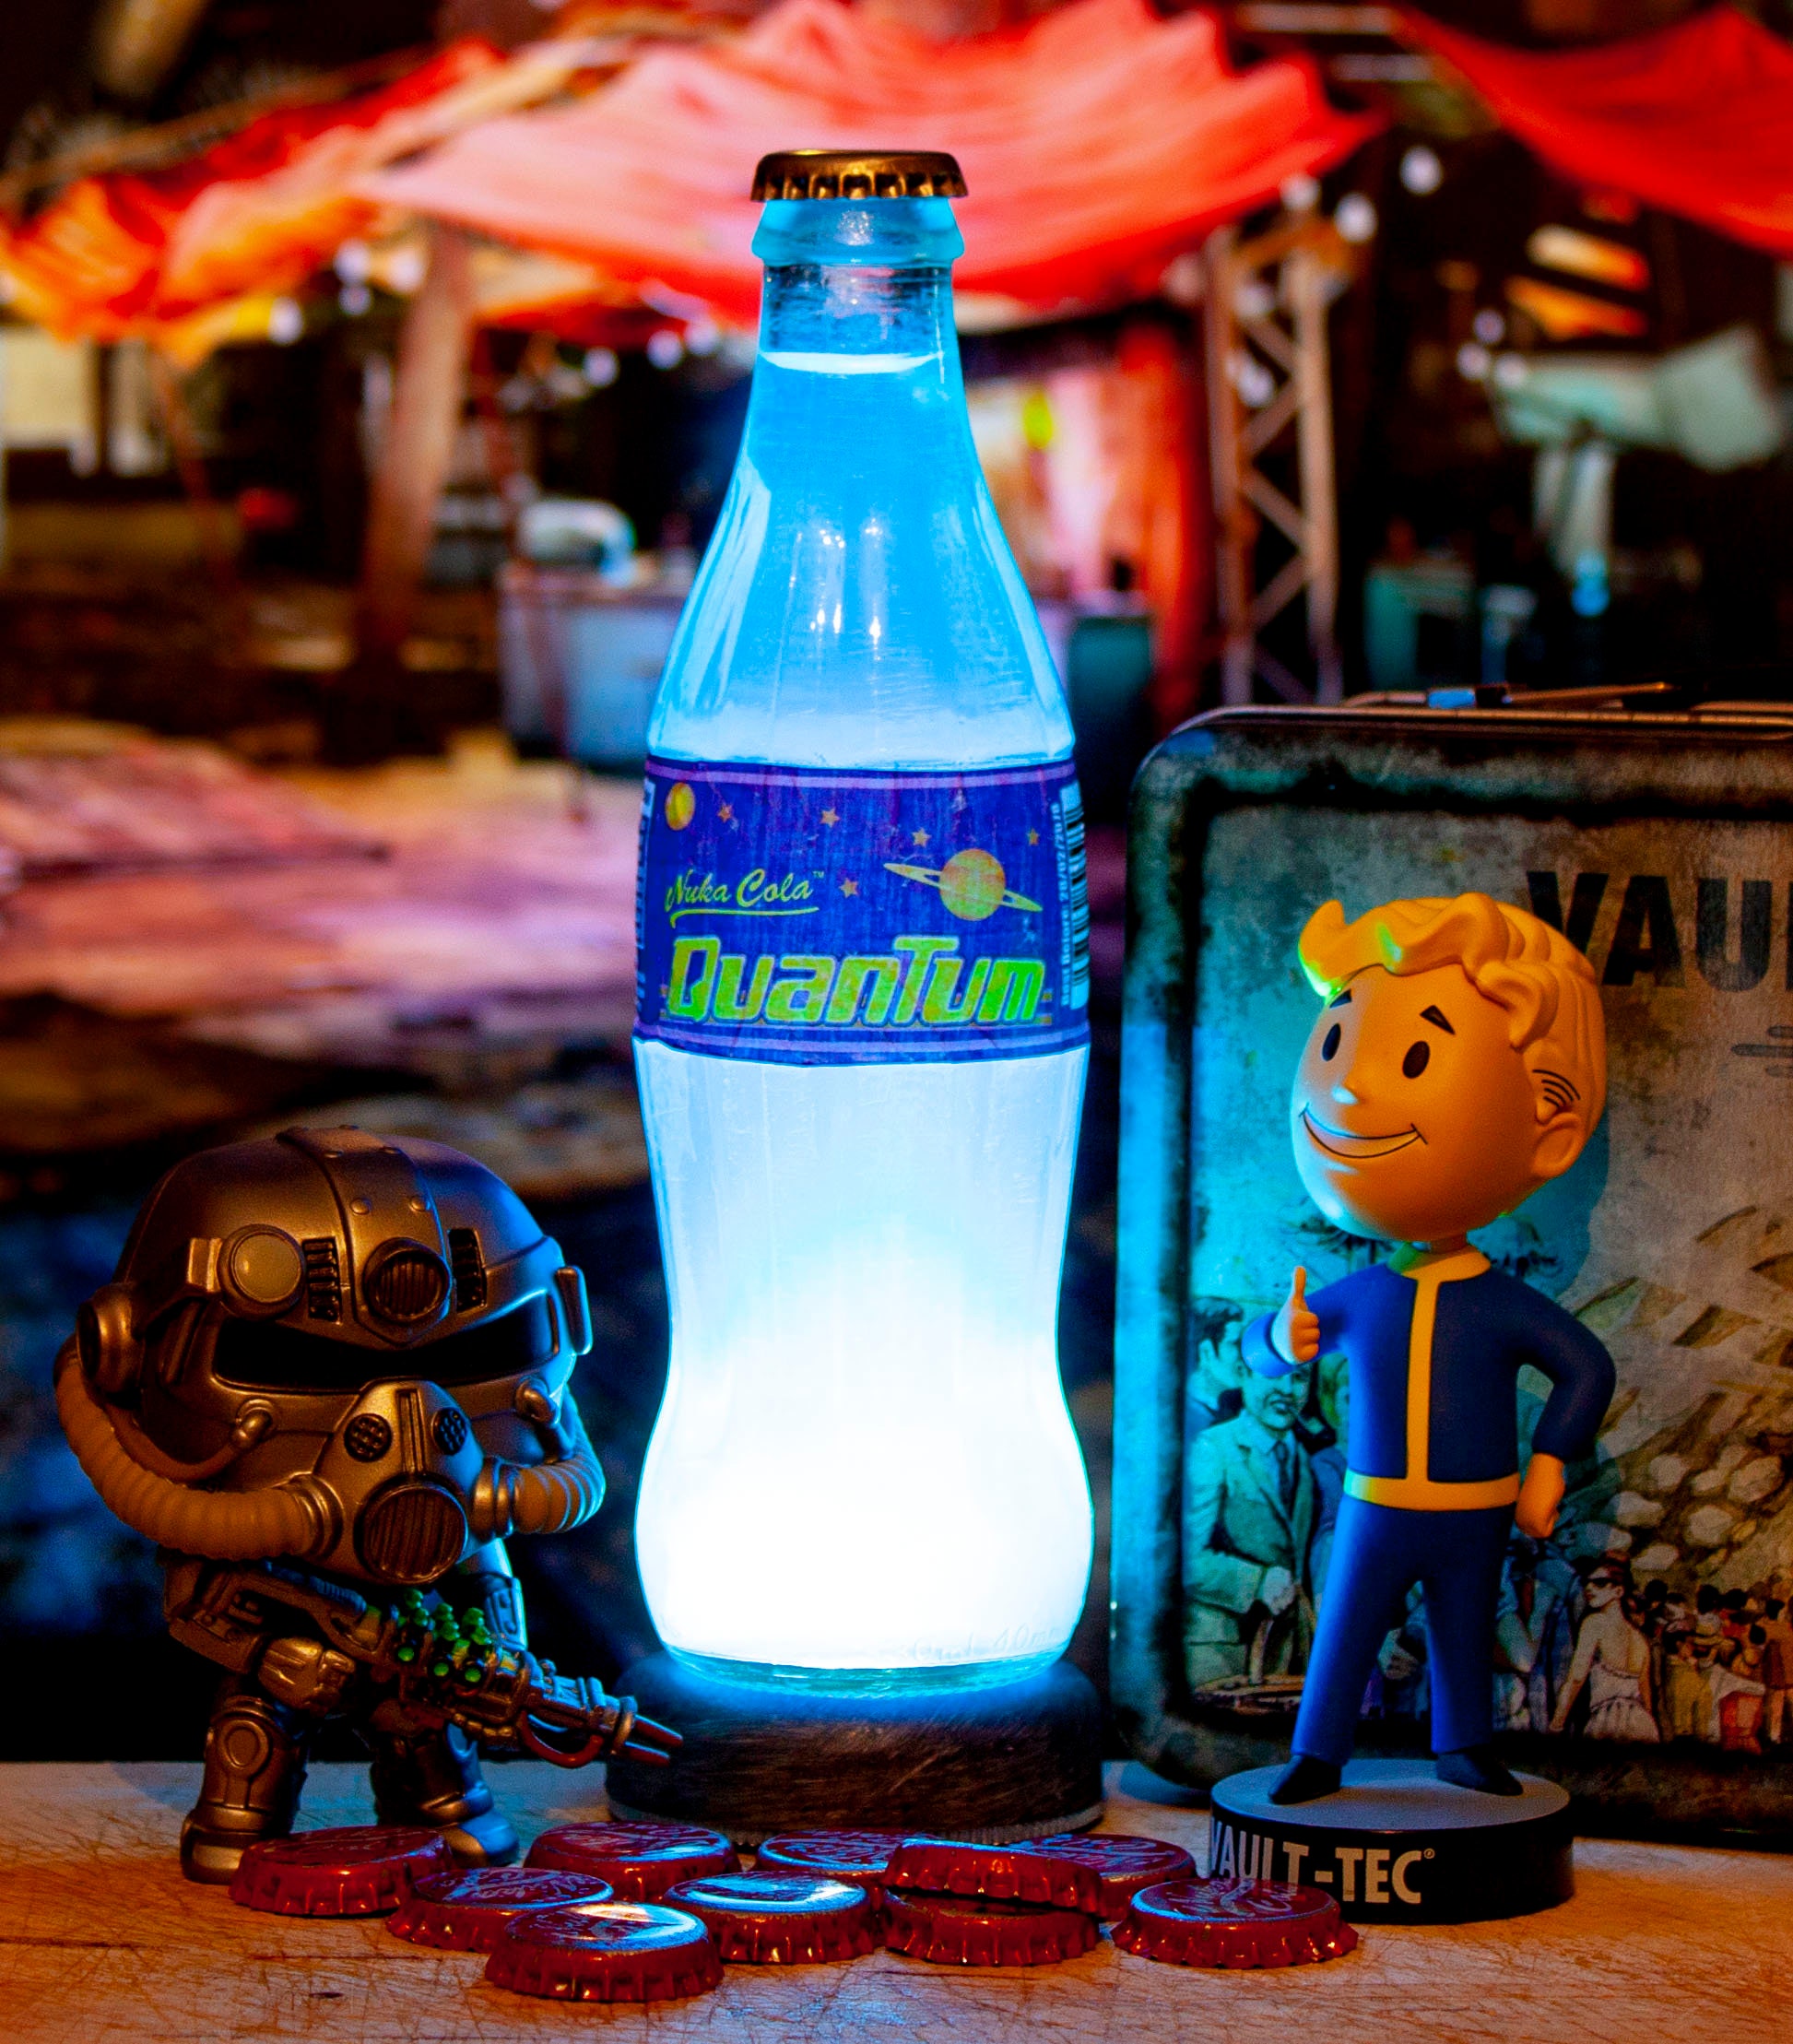 Don't drink glowing cola!